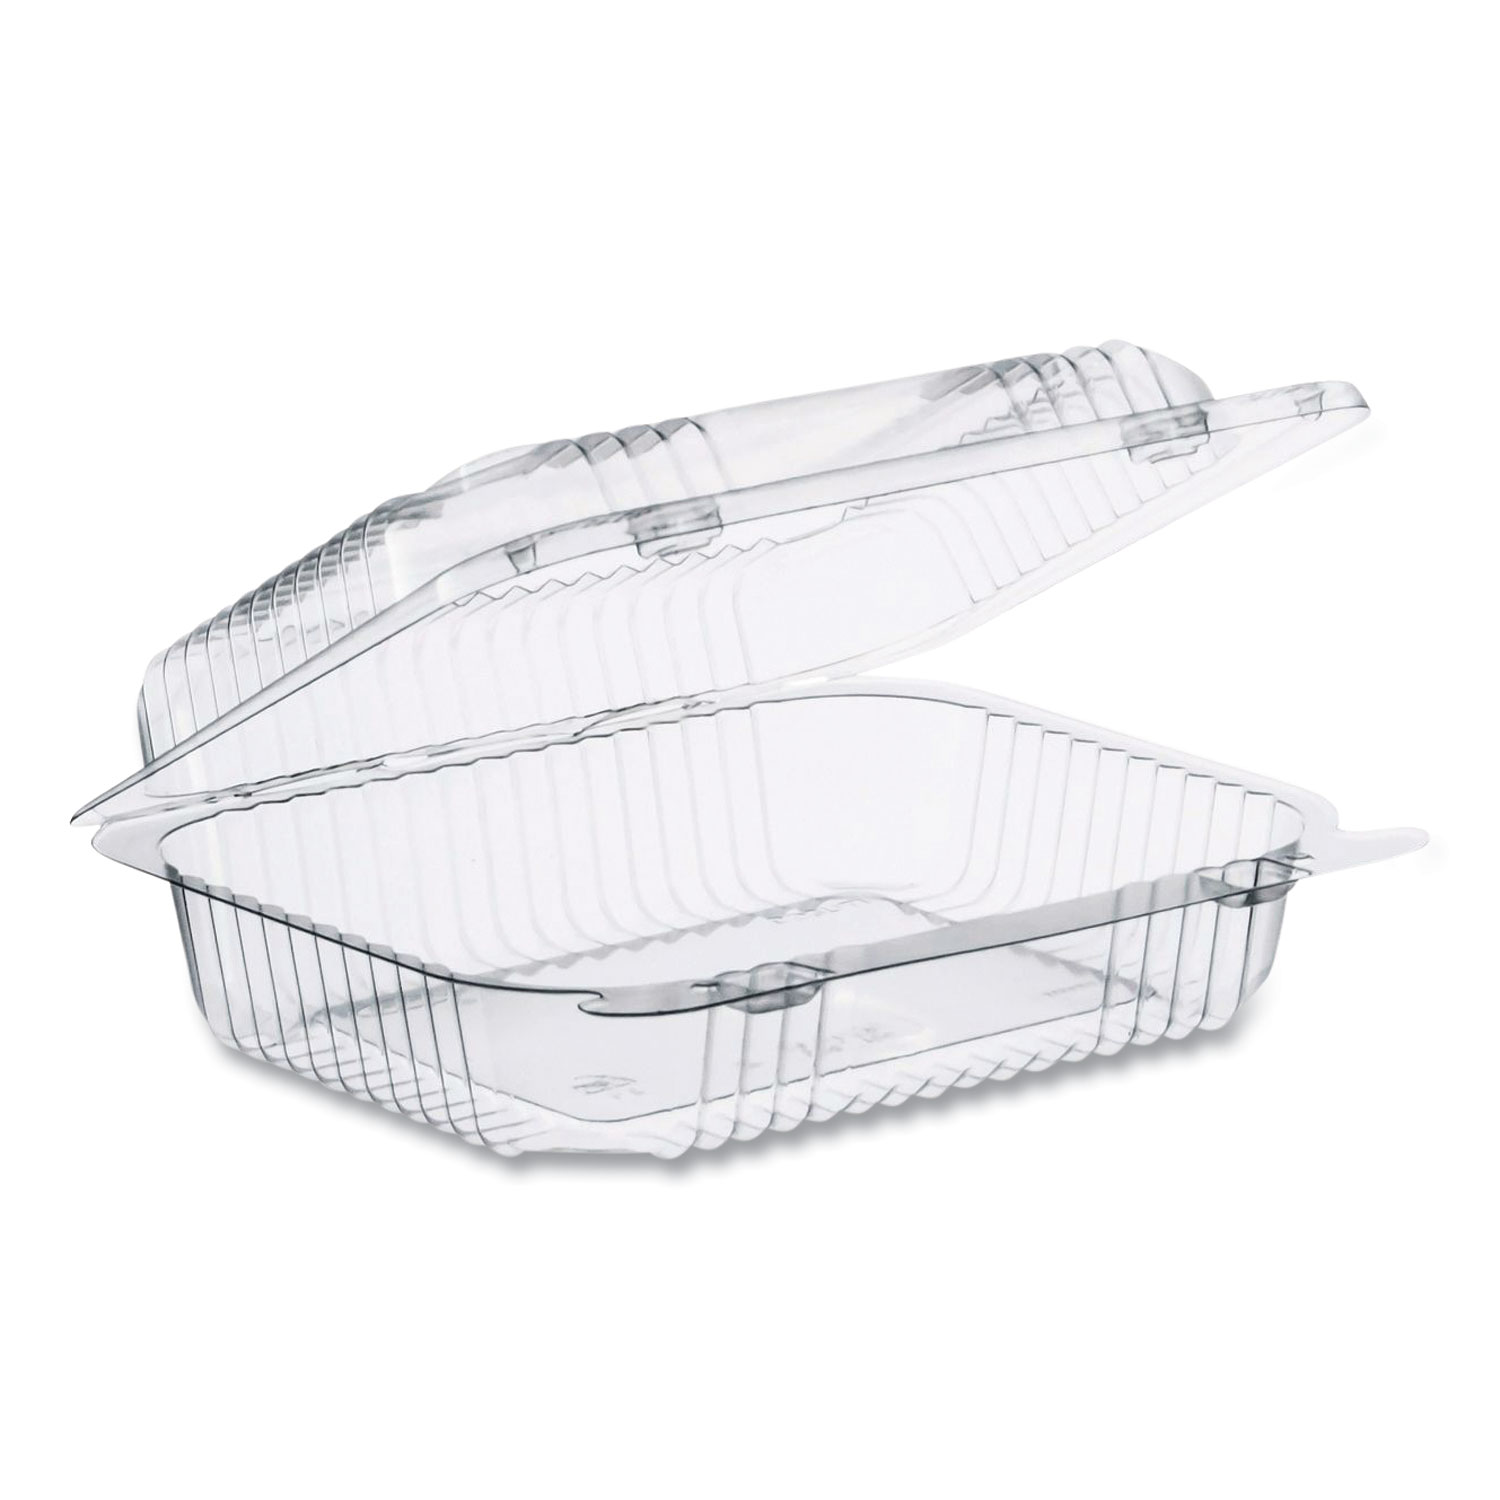 125-Pack) 6 x 6 x 3 Clear Hinged Lid Plastic Takeout To Go Box Container  New